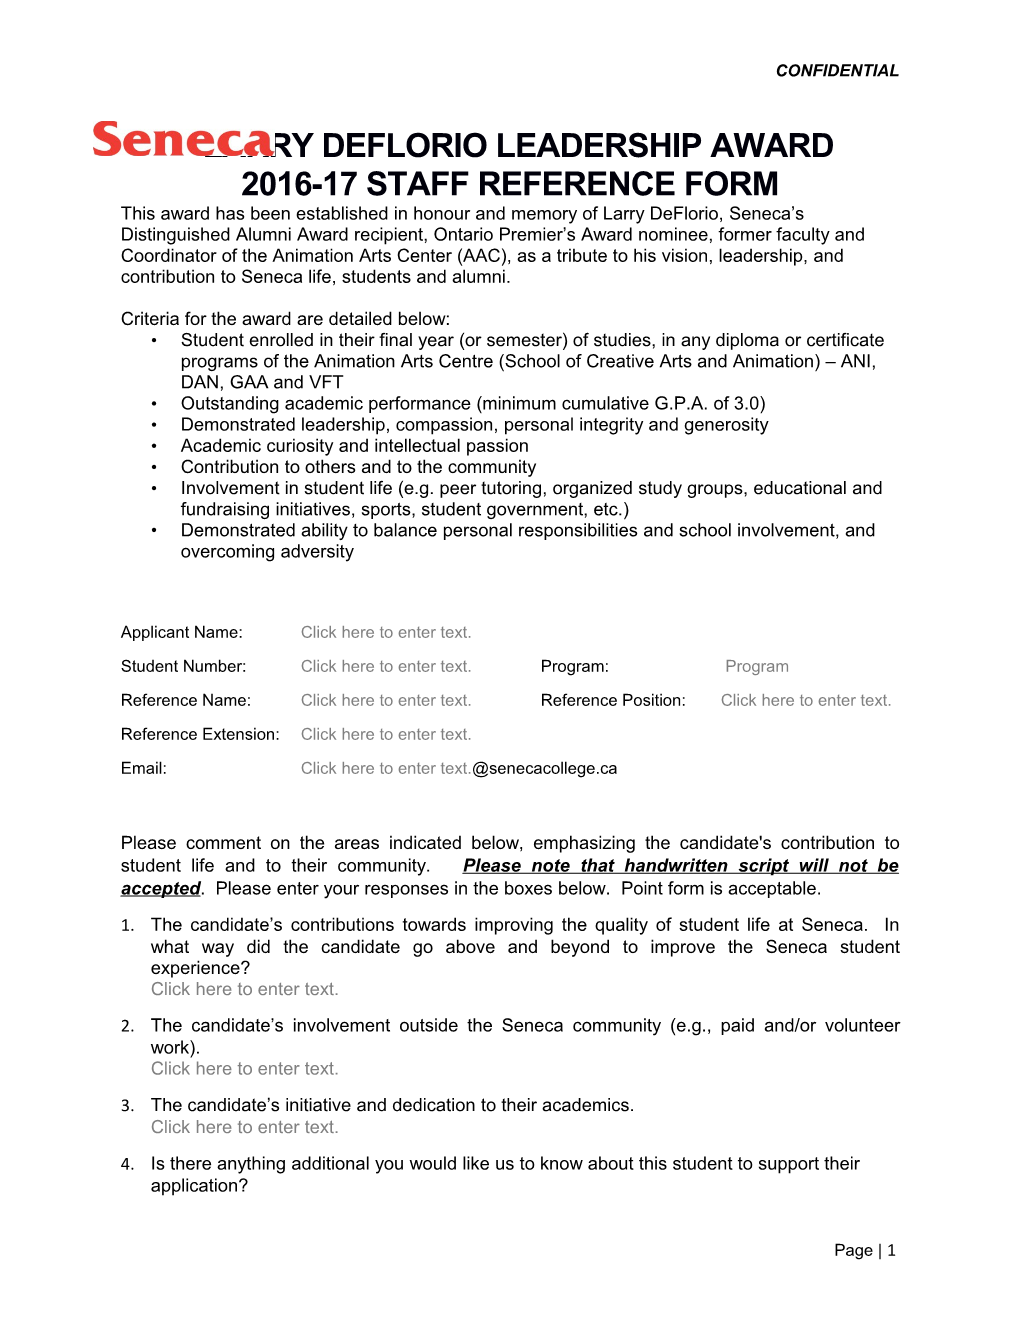 2016-17 Staff Reference Form